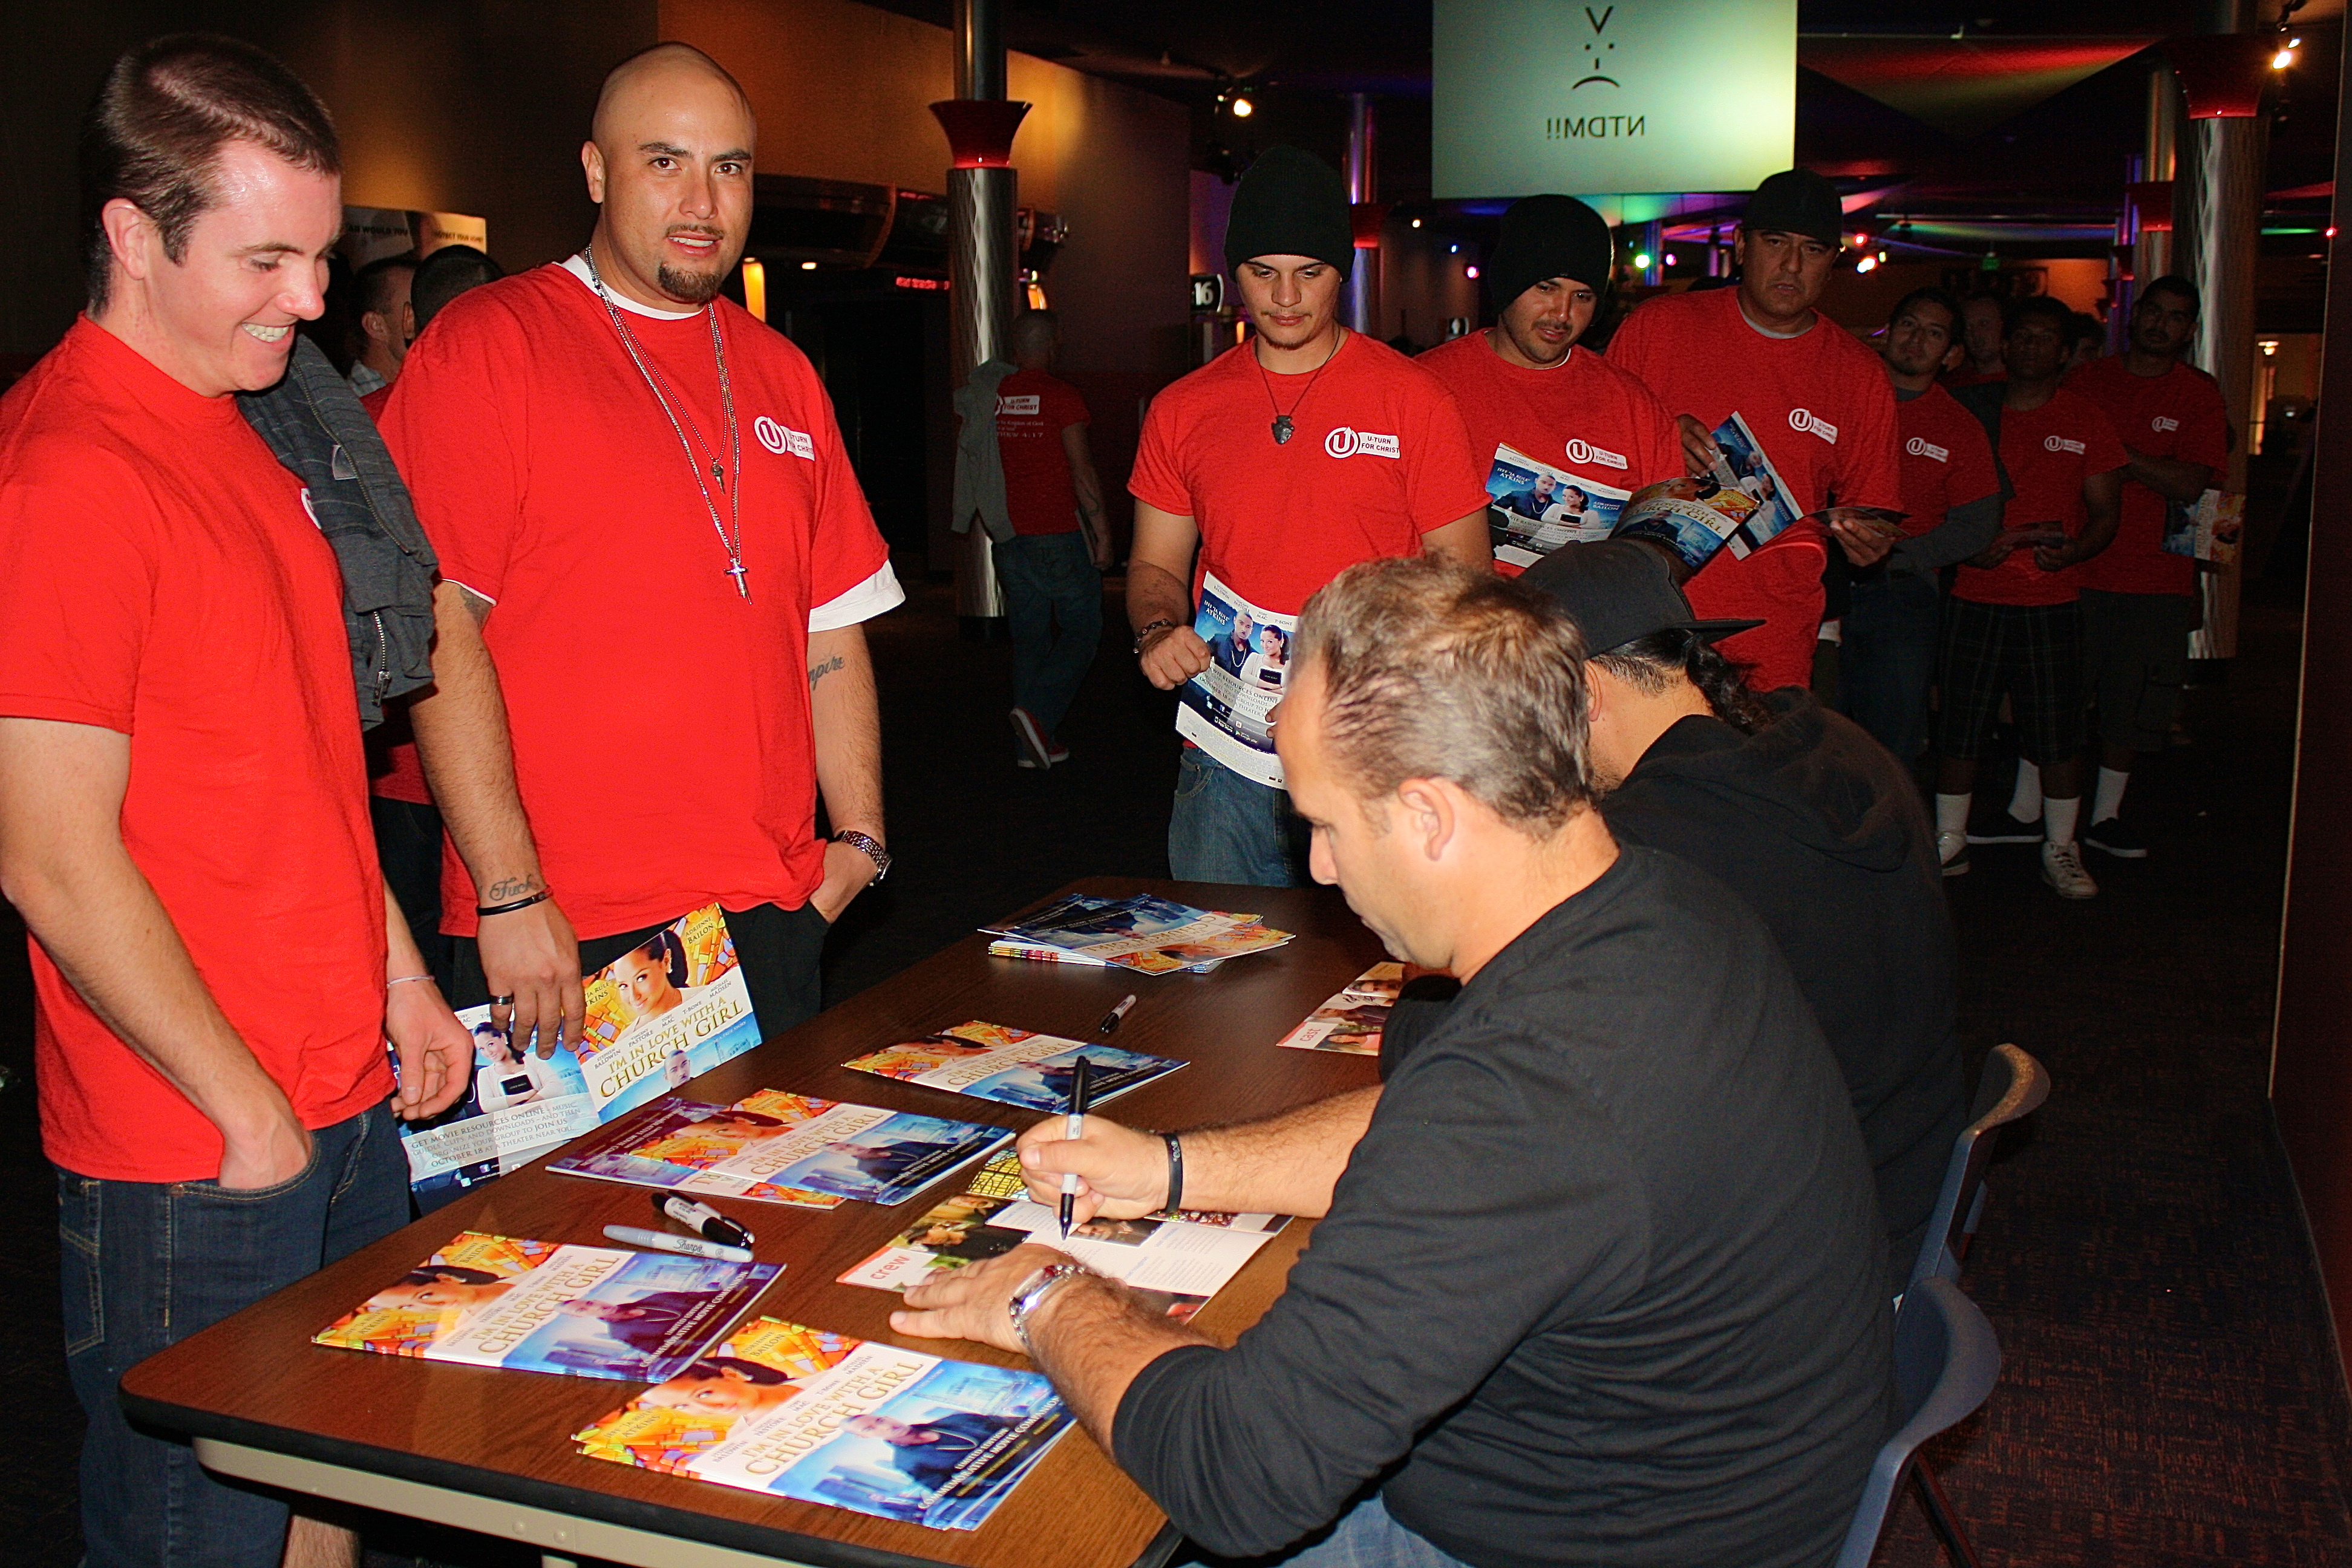 Director Steve Race at an Autograph signing.